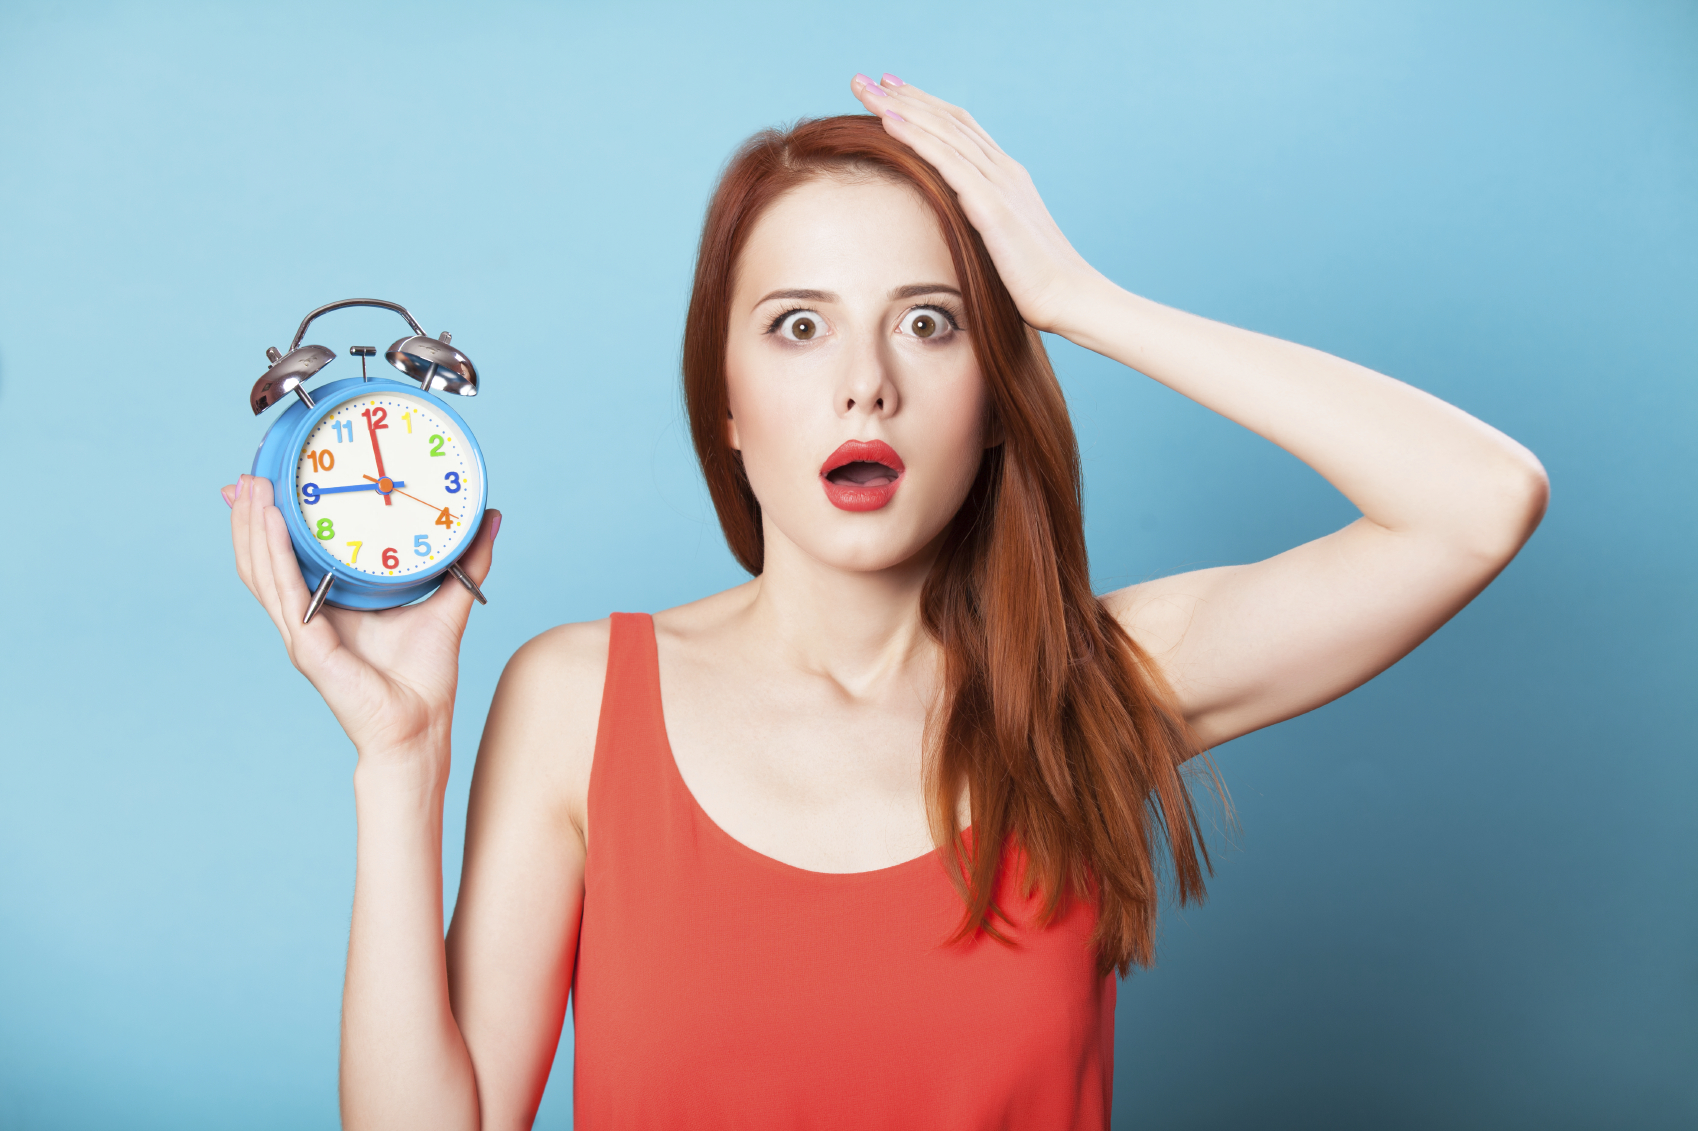 Surprised redhead women woth alarm clock on blue background.